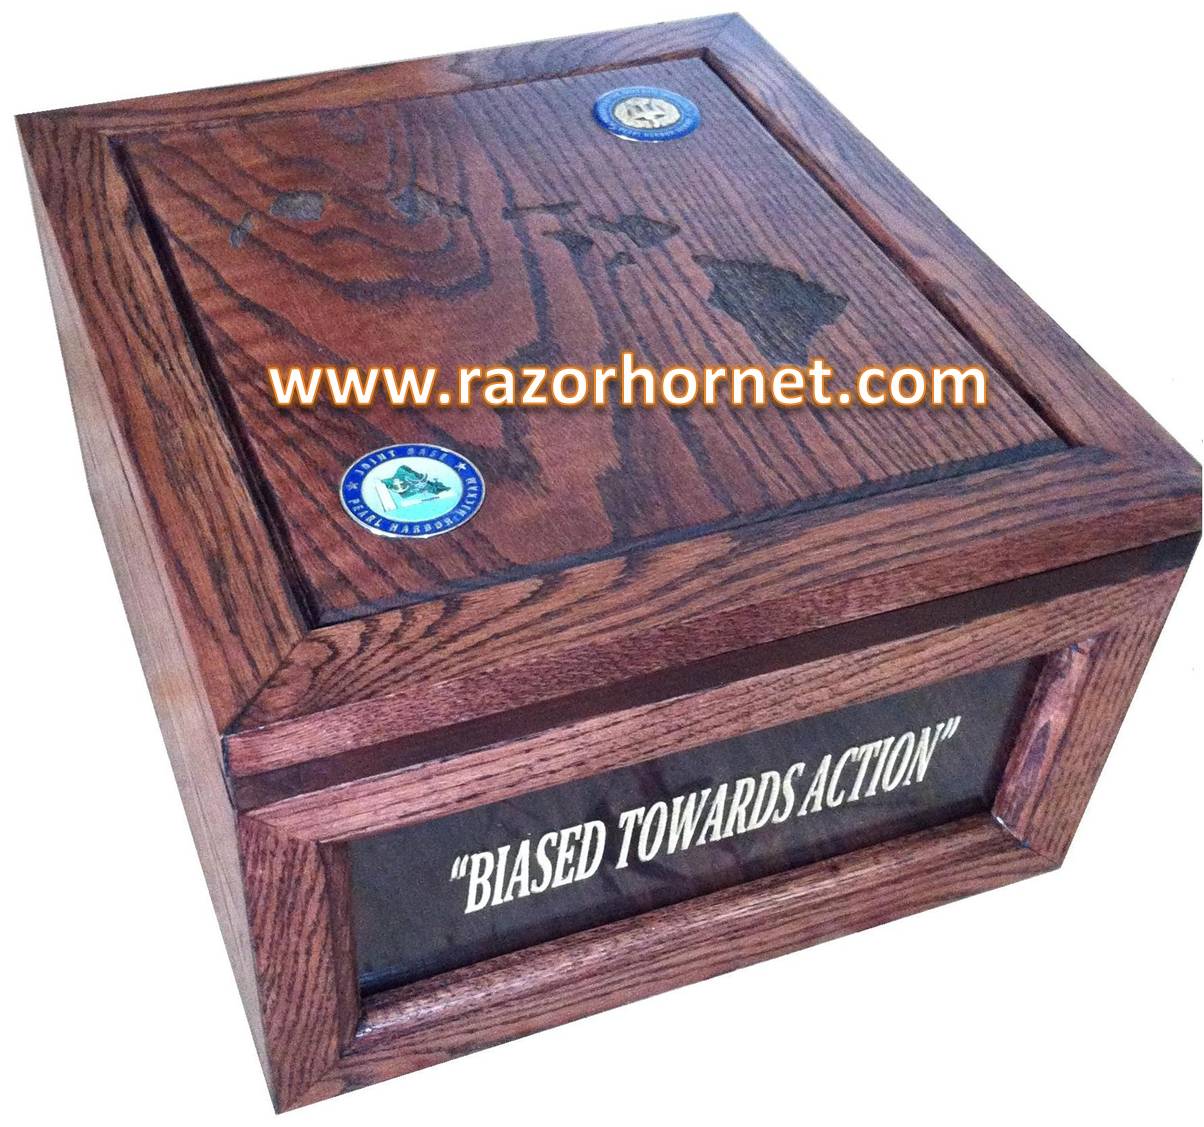 Officer Departing gift military hat box